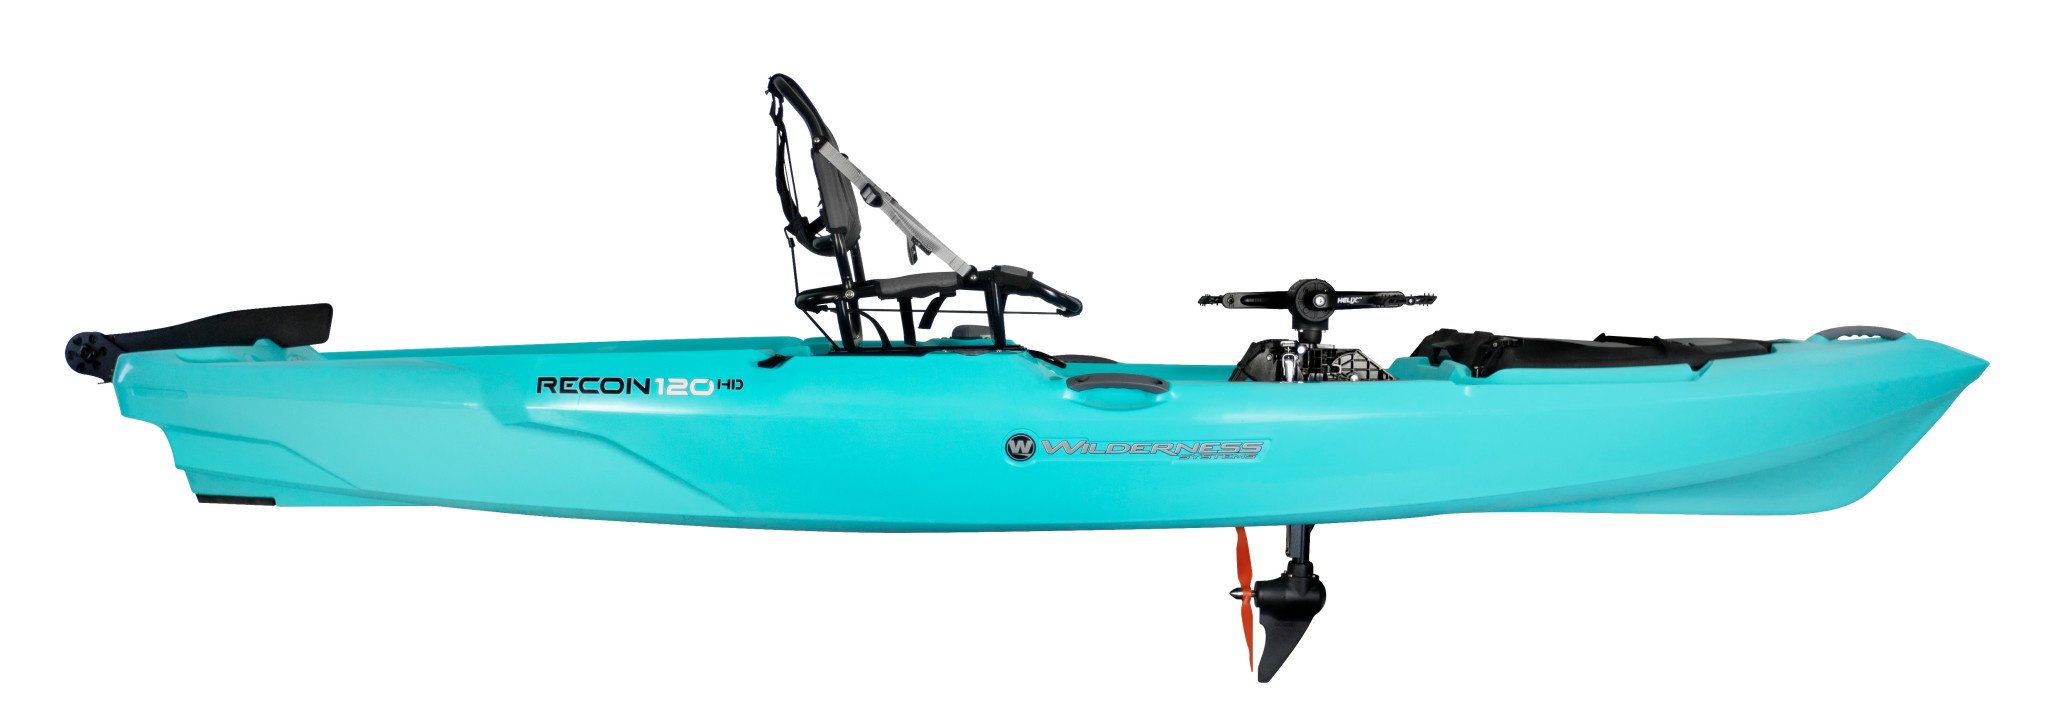 Wilderness Systems Recon HD 120 Fishing Kayak - Great Lakes Outfitters